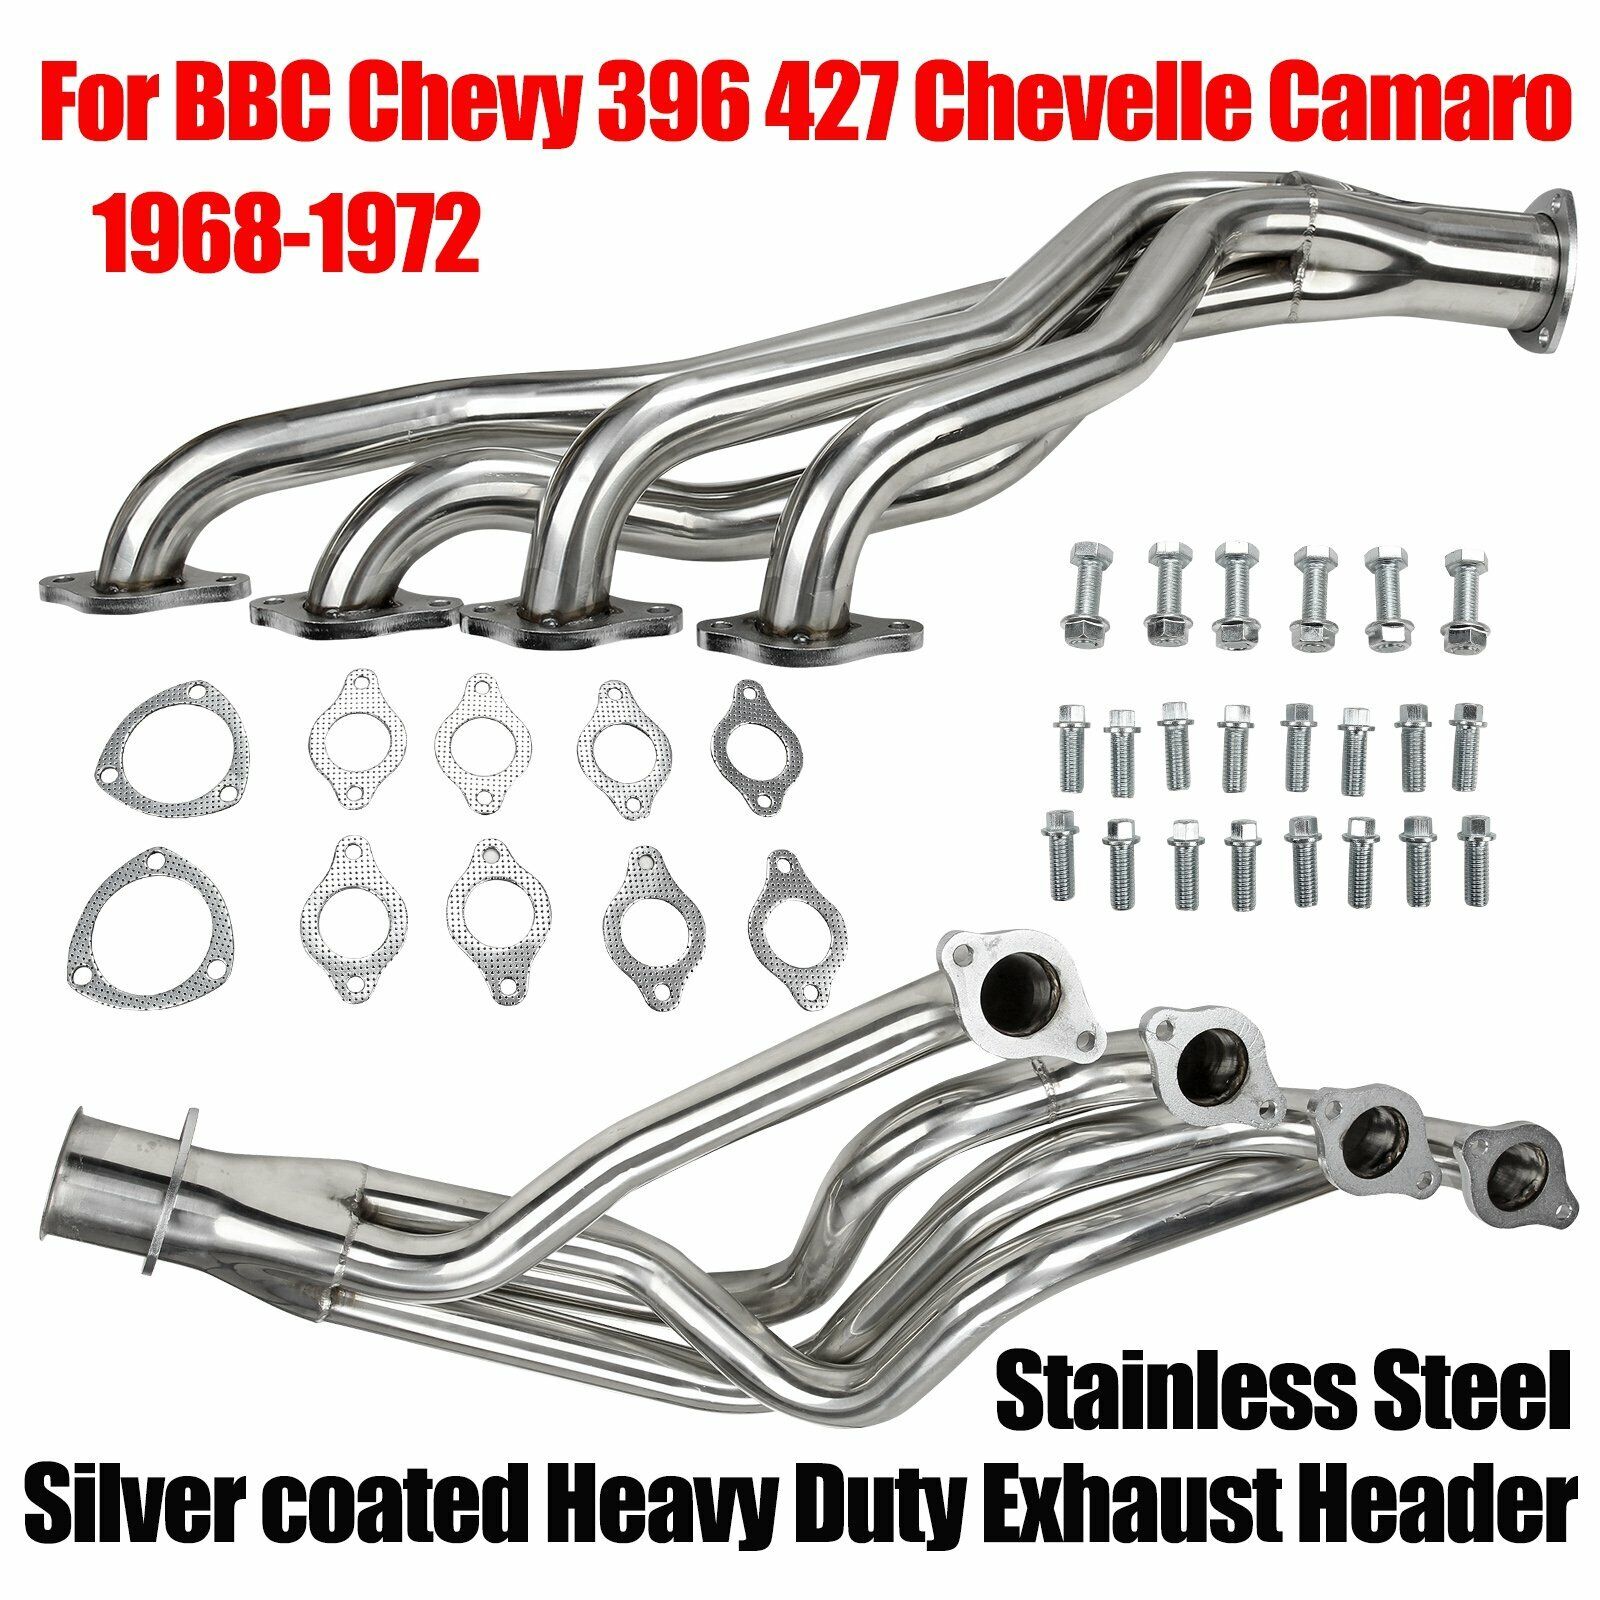 For 68-72 BBC Chevy 396 427 Chevelle Camaro Heavy Duty Headers Silver coated